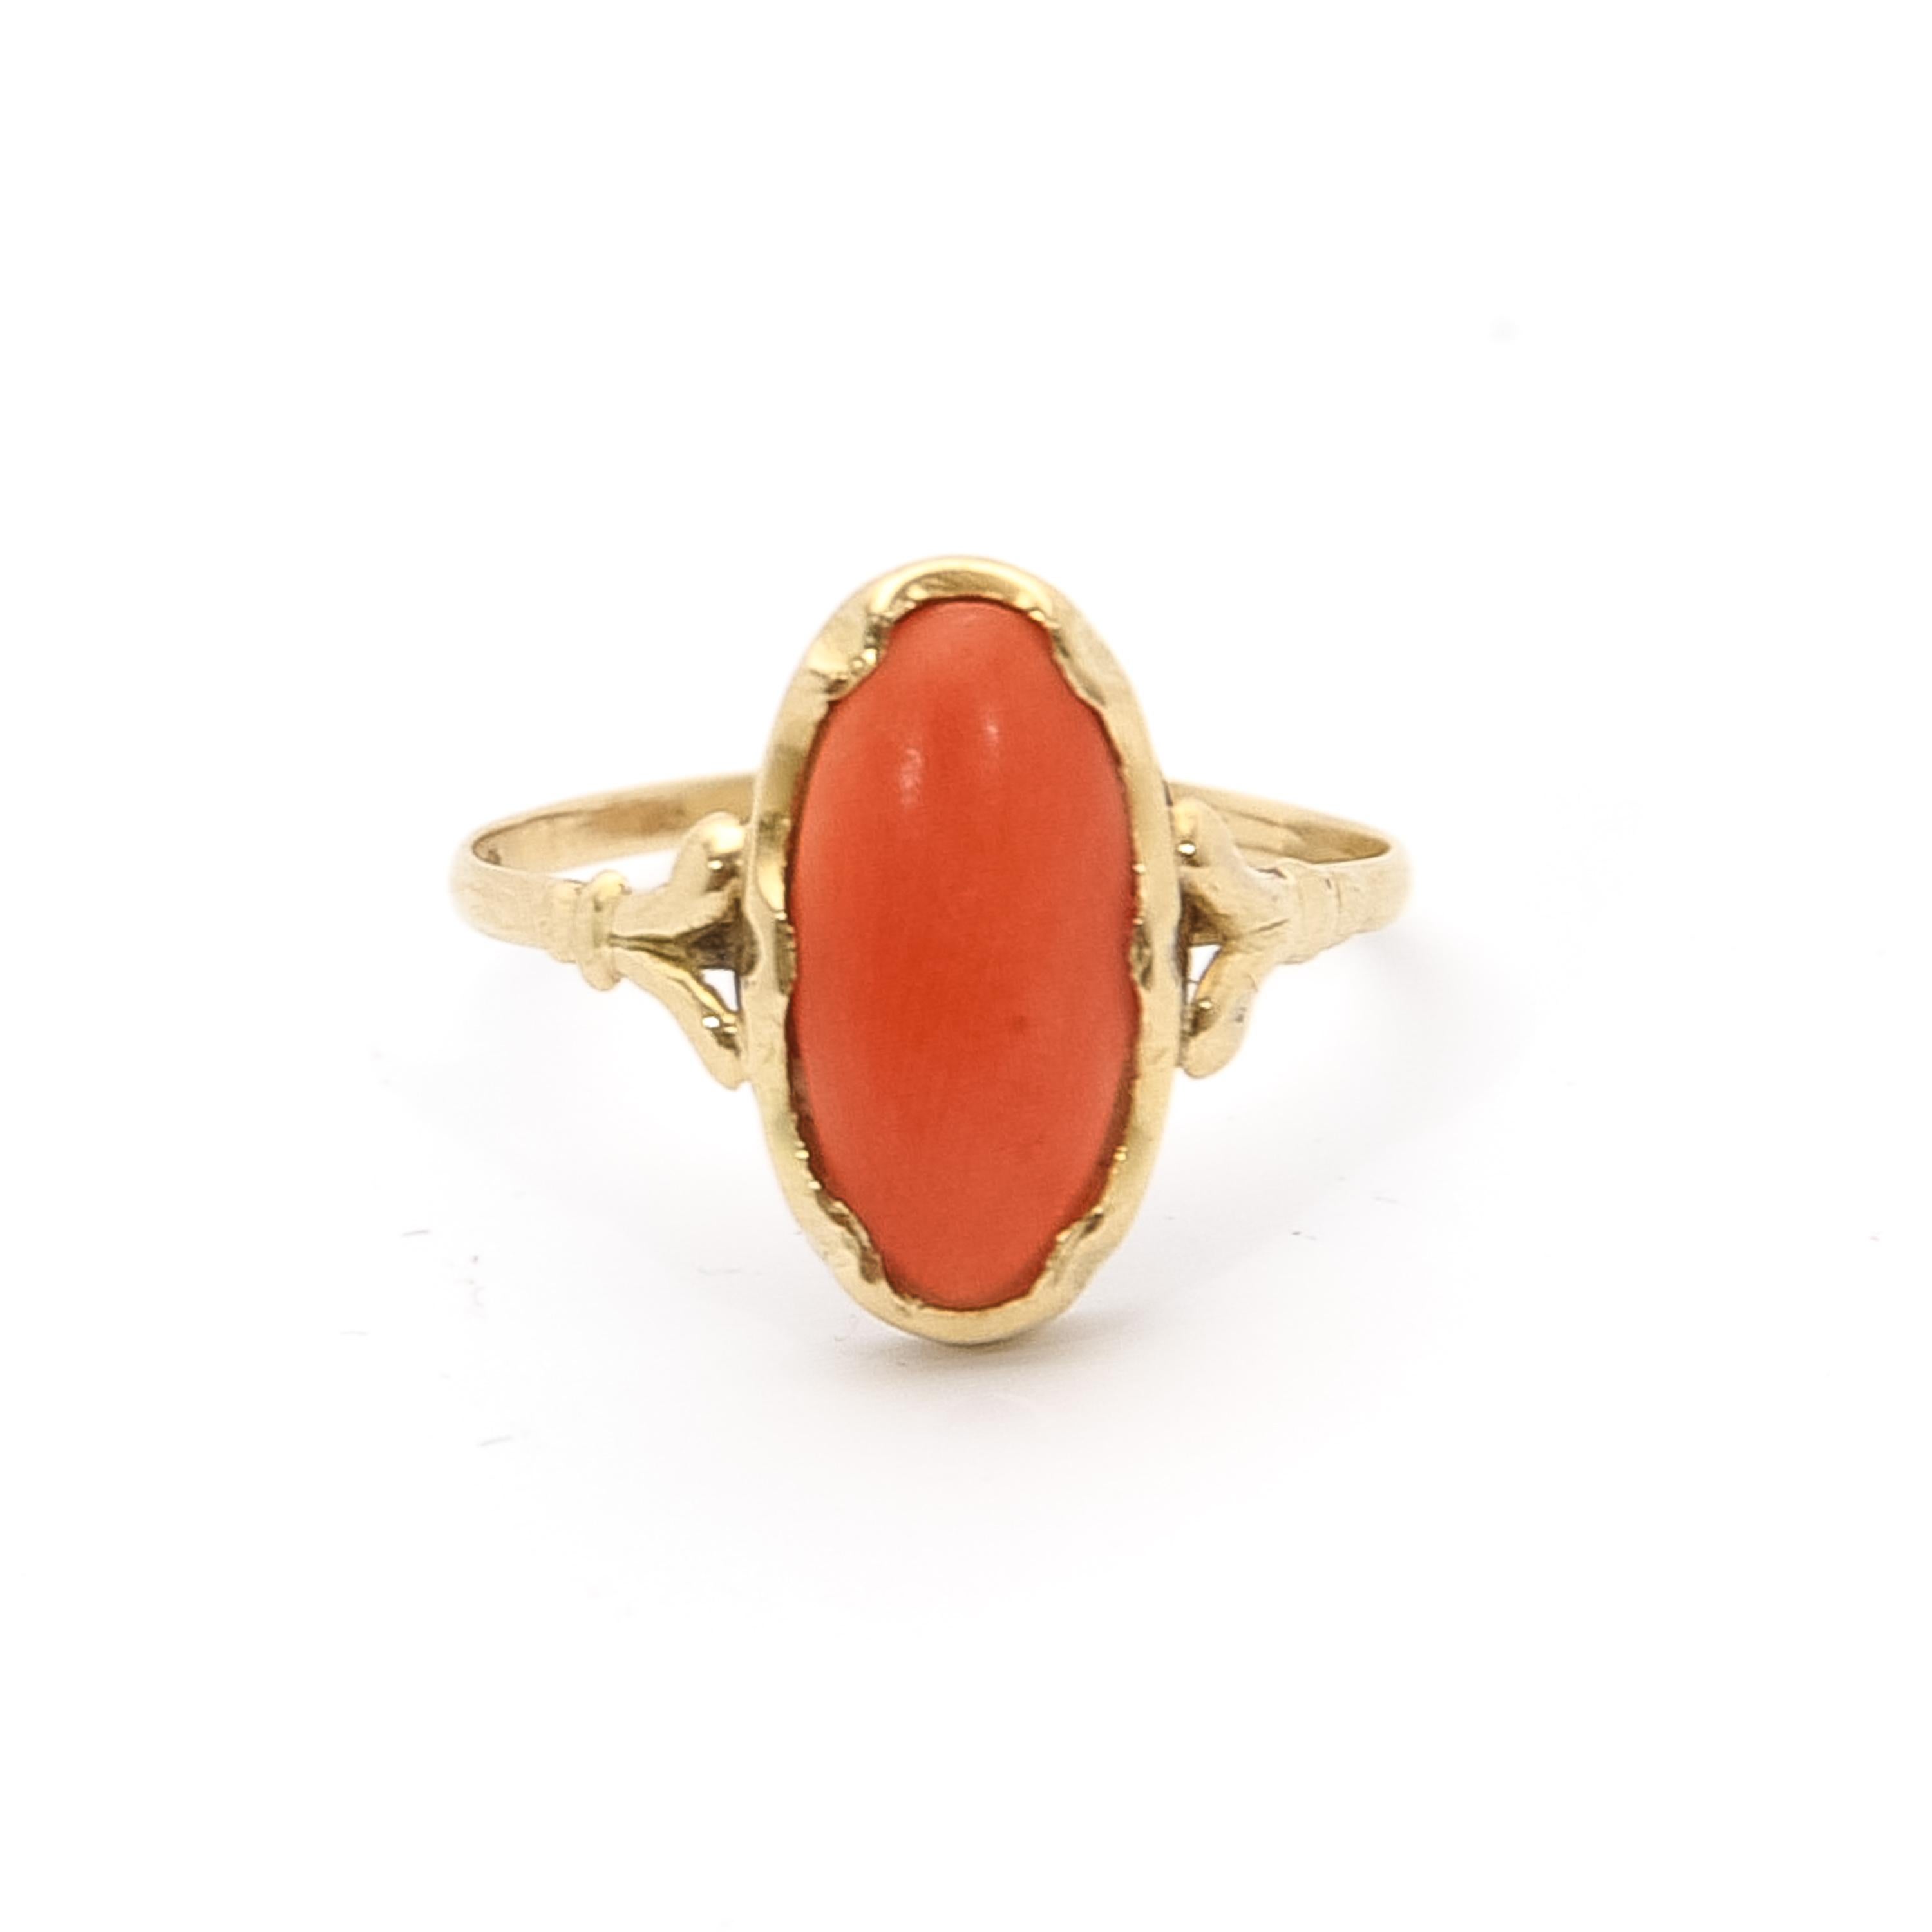 Coral jewelry is rare and unique, it’s adding a warm touch to any outfit. The setting of this ring has an elegance that allows the oval coral stone to be the center of attention that it deserves. The ring is beautiful and makes a definite statement